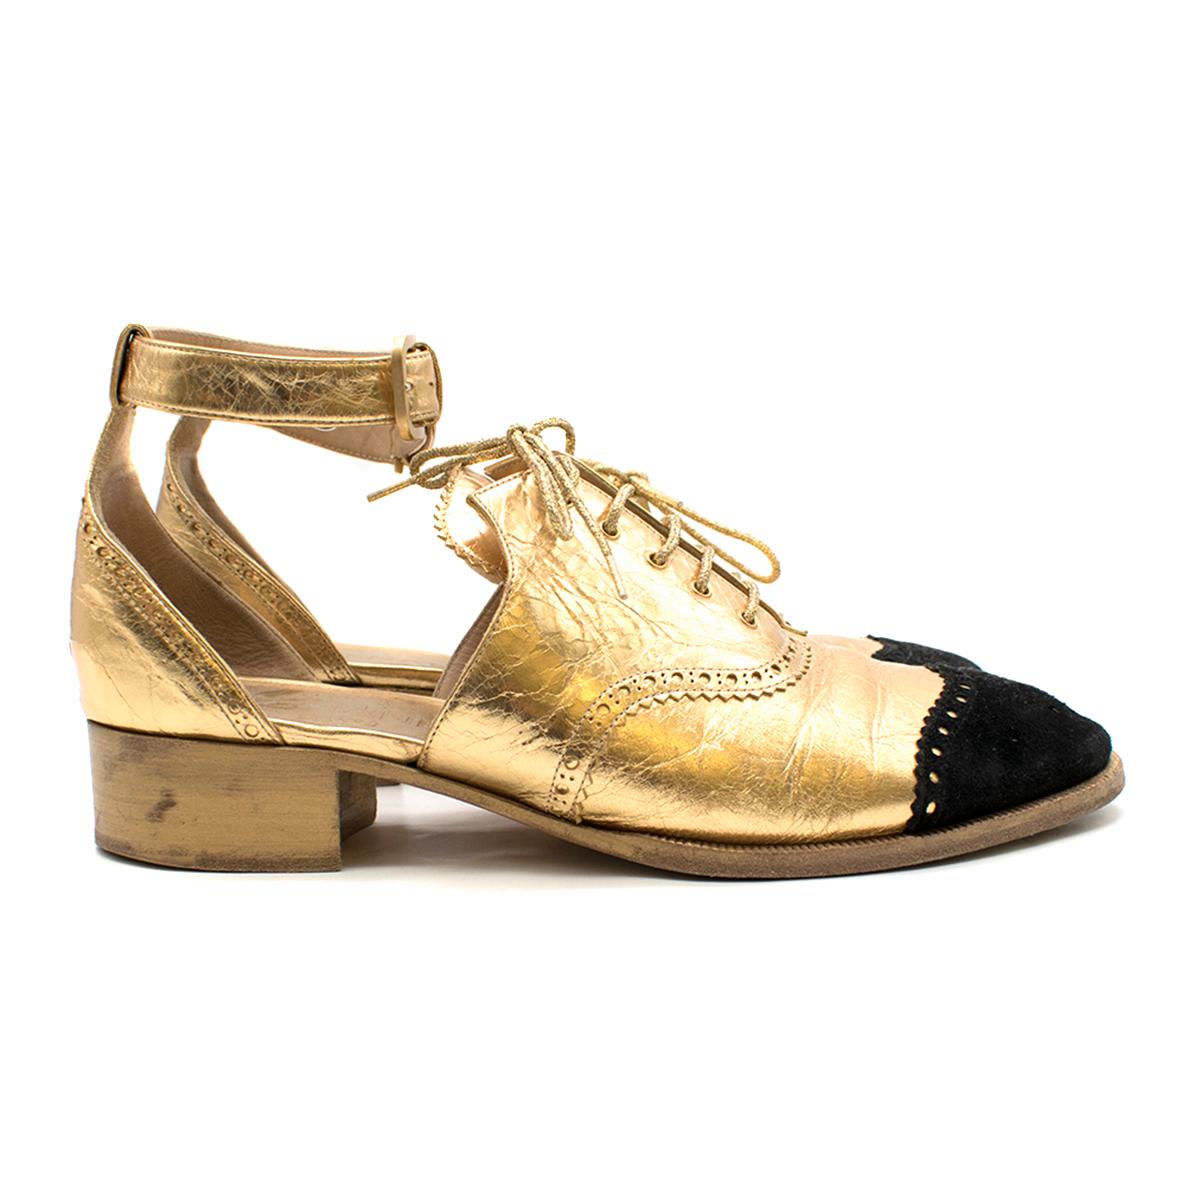 Chanel cut-out gold leather brogues 

- Gold, leather 
- Round toe, small stacked leather heel 
- Classic wingtip brogue detailing 
- Black suede toe cap, perforated CC
- Cutout feature 
- Gold lace-up front 
- Gold leather insole, nude leather